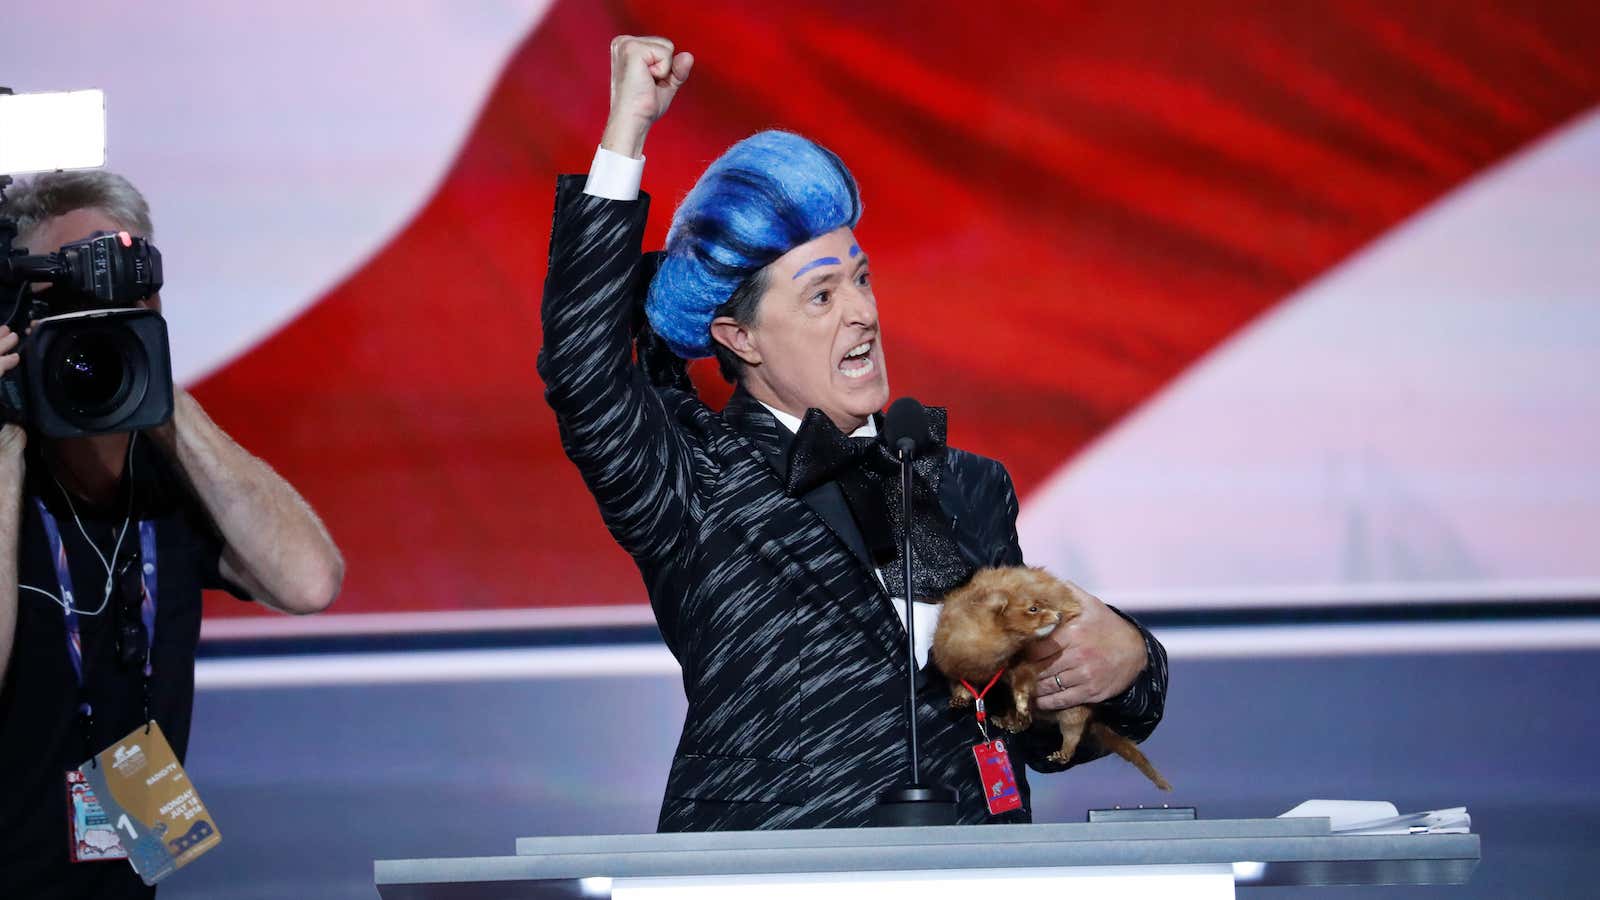 Comedian Stephen Colbert kicks off the Republican National Convention with a “Hunger Games”-style prank.